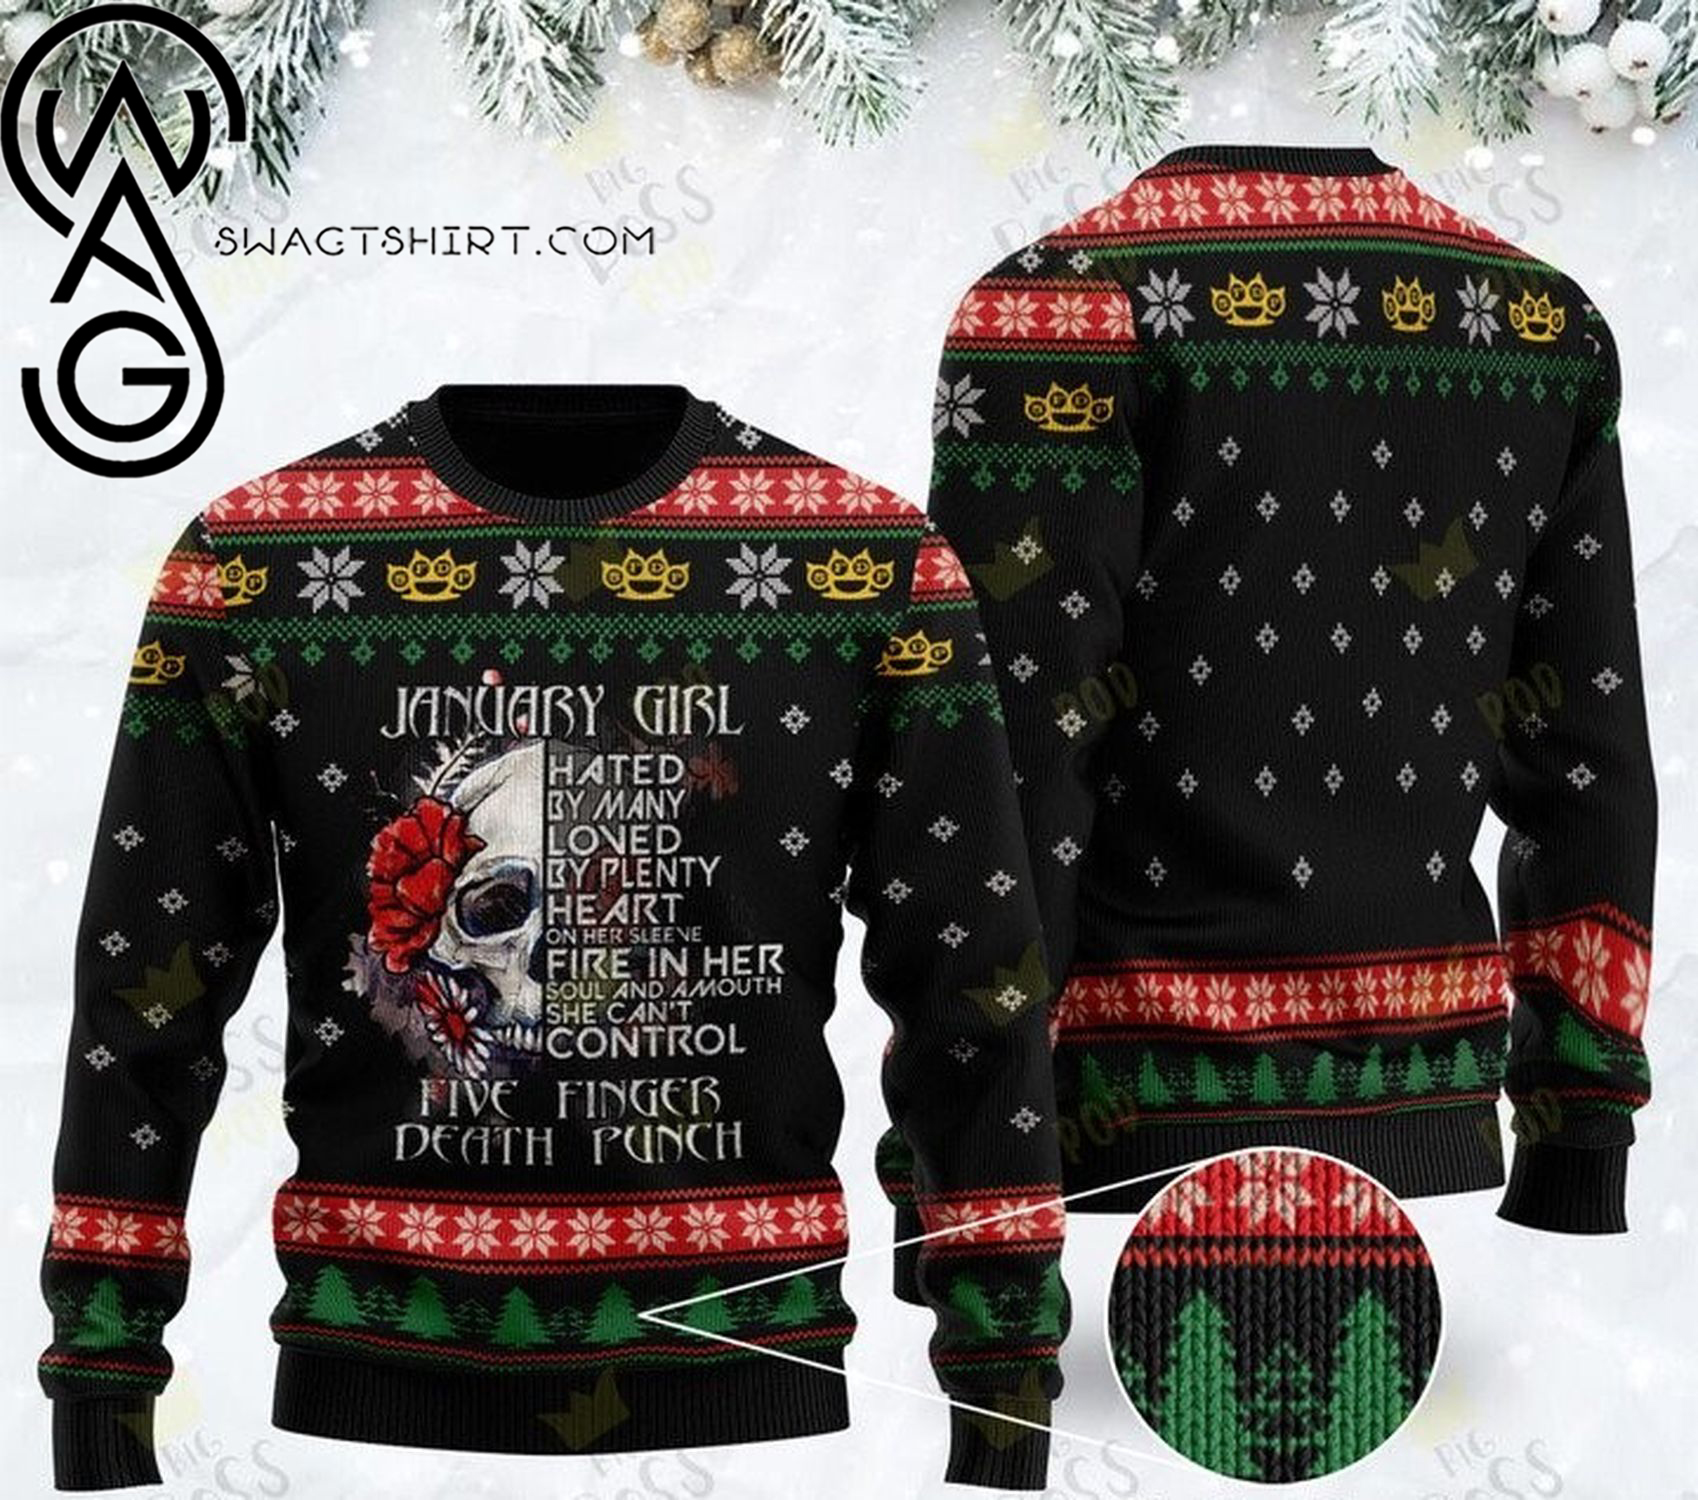 January girl five finger death punch ugly christmas sweater - Copy (4)